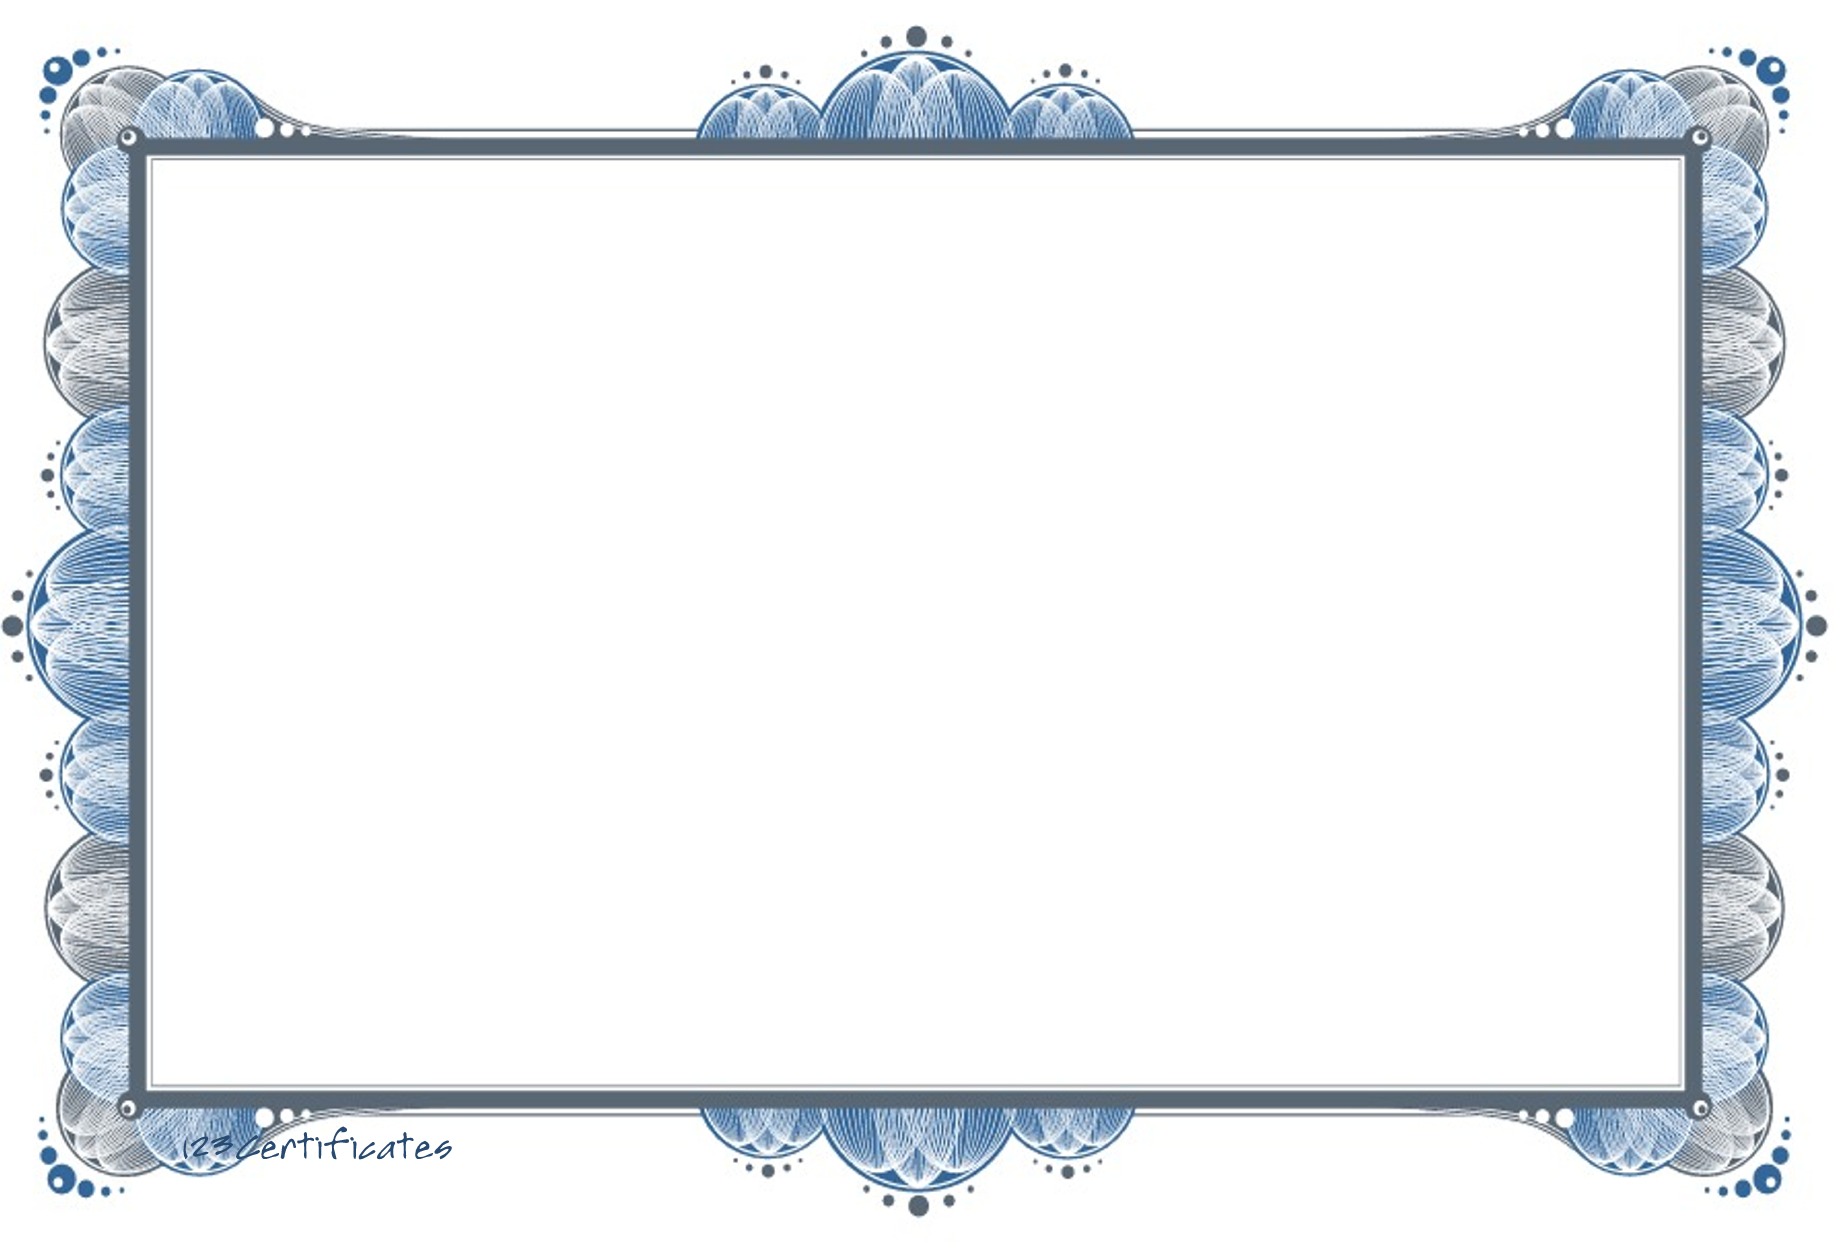 Free Certificate Borders, Download Free Certificate Borders png Throughout Free Printable Certificate Border Templates